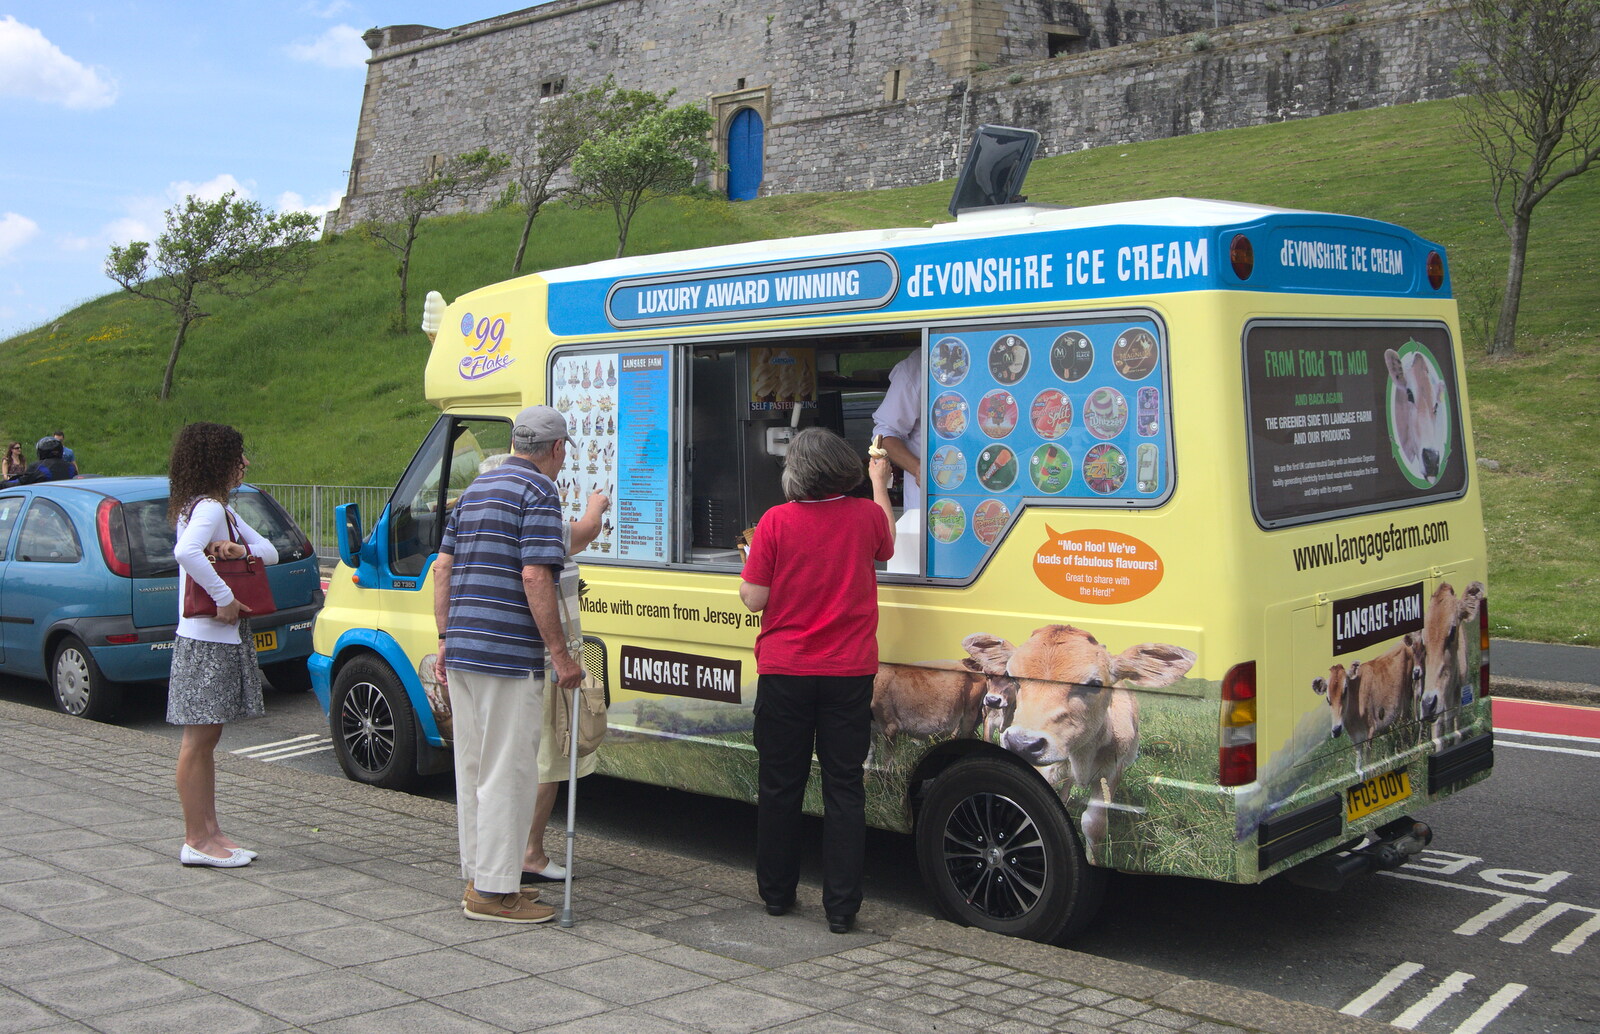 The queues have died down at the ice cream van from A Tamar River Trip, Plymouth, Devon - 30th May 2016